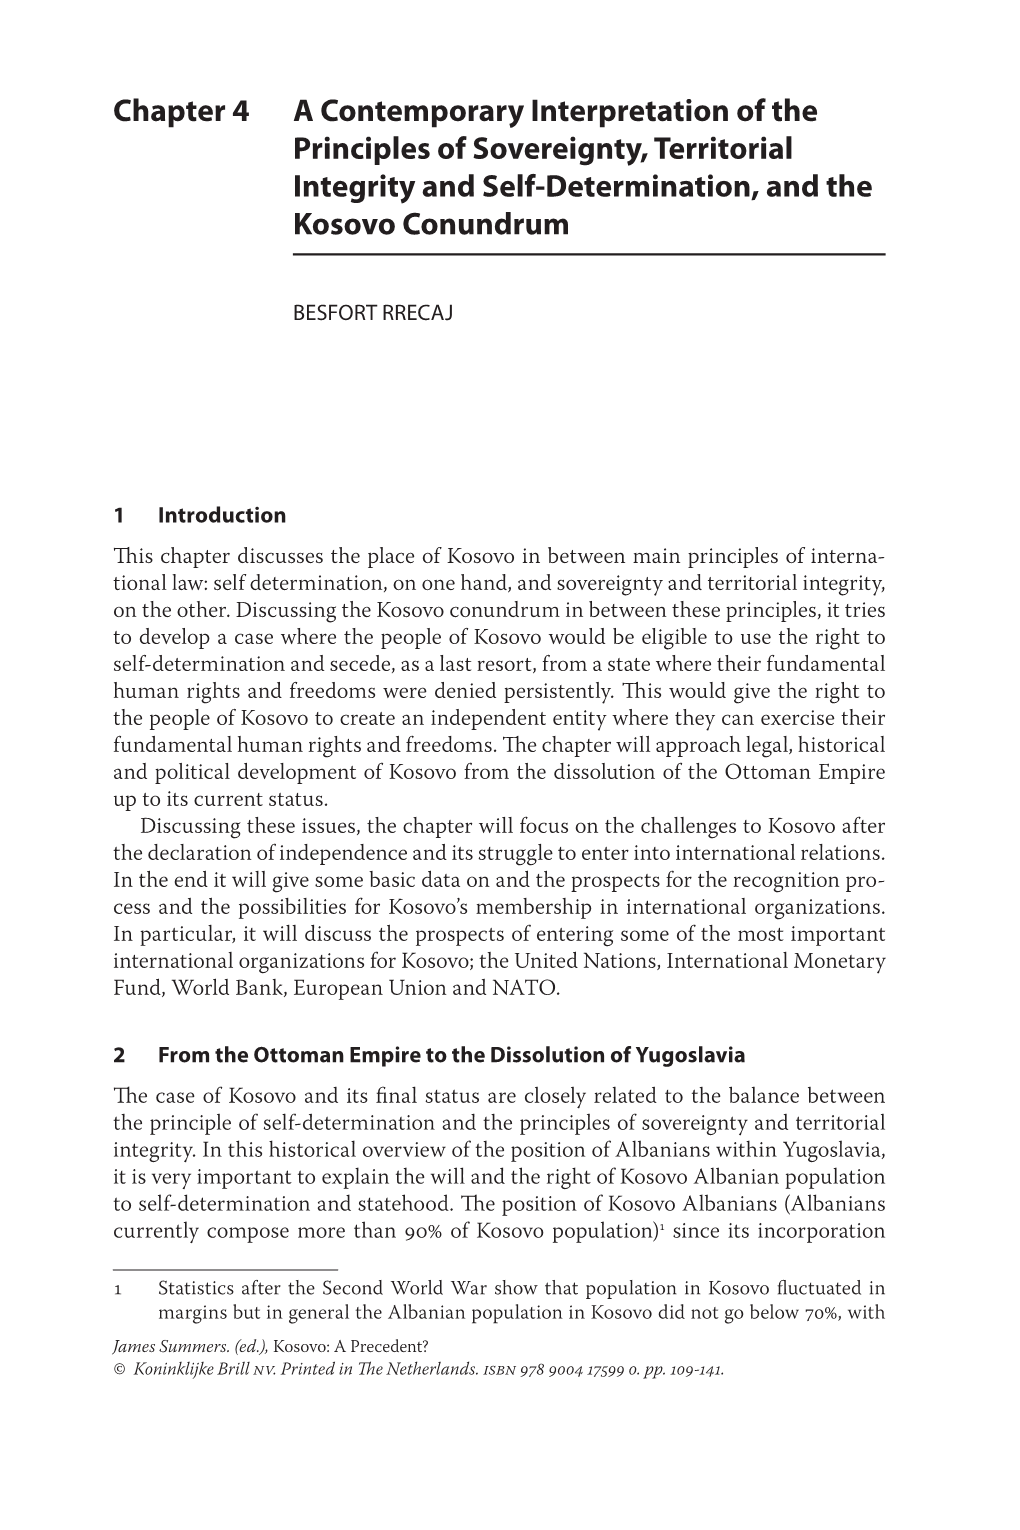 Chapter 4 a Contemporary Interpretation of the Principles of Sovereignty, Territorial Integrity and Self-Determination, and the Kosovo Conundrum